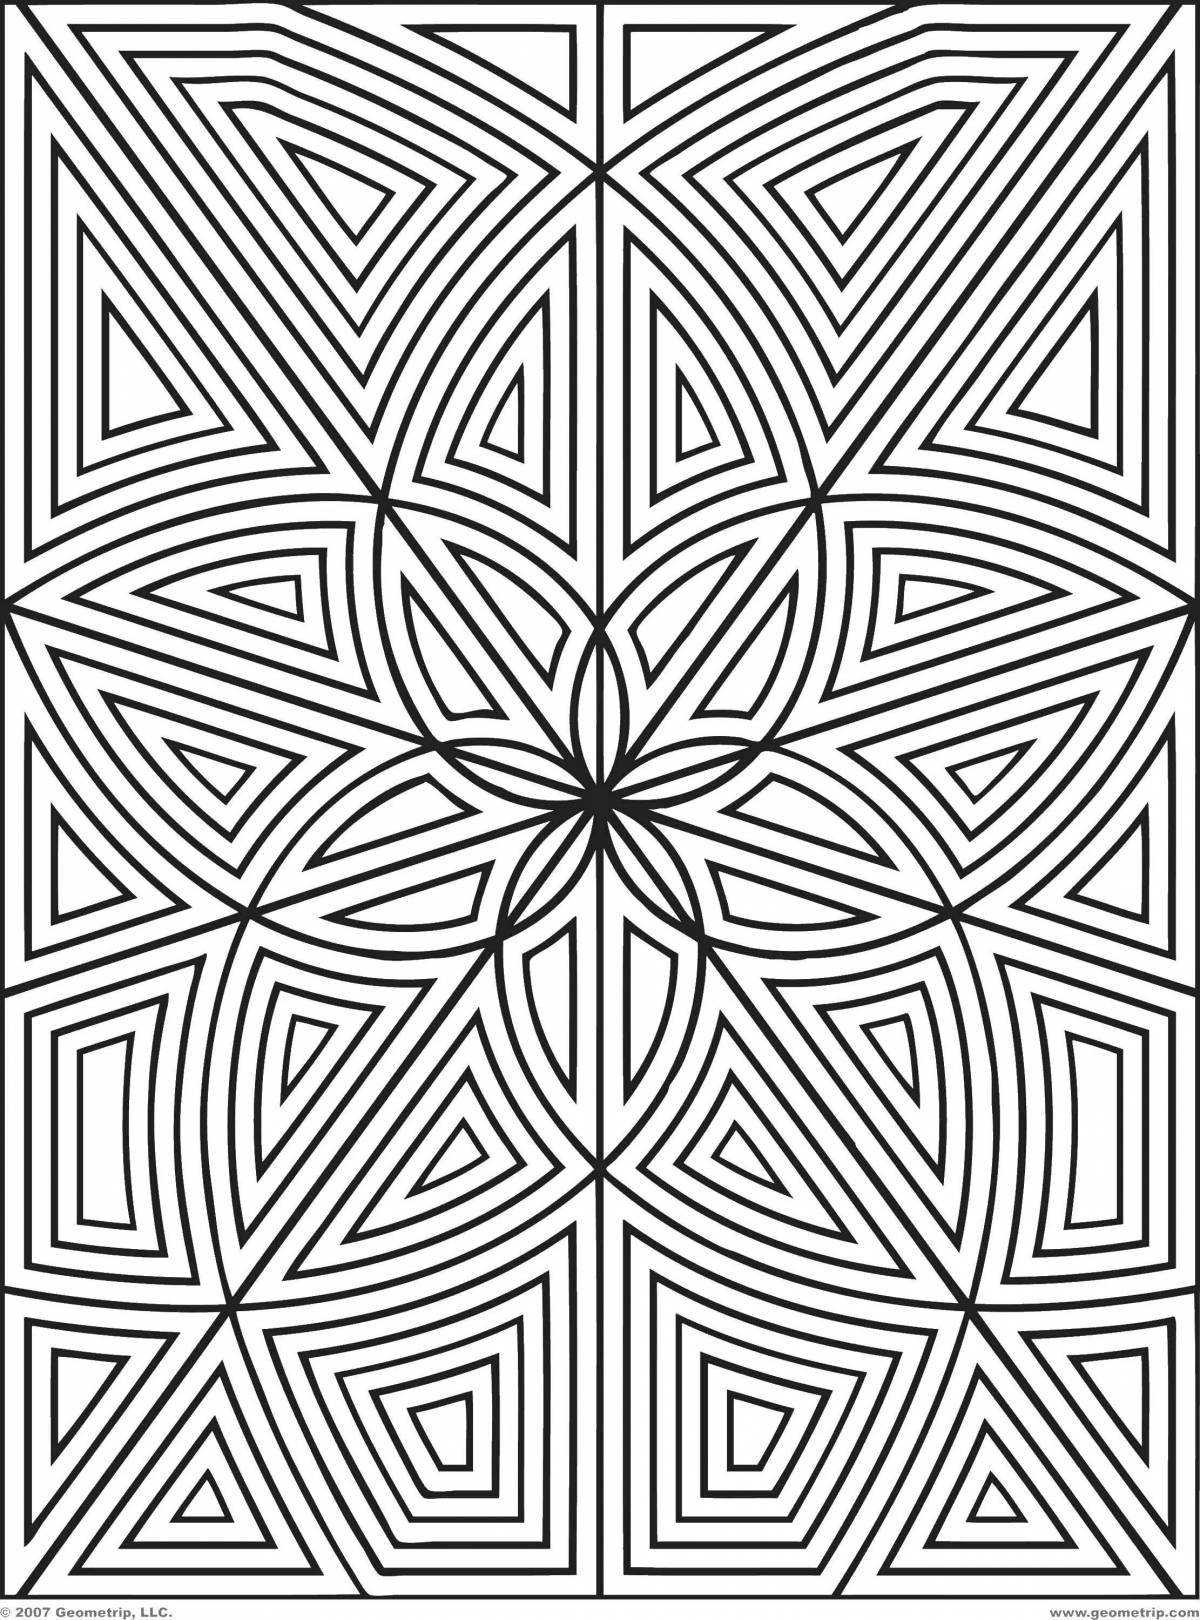 Exquisite geometric pattern coloring page